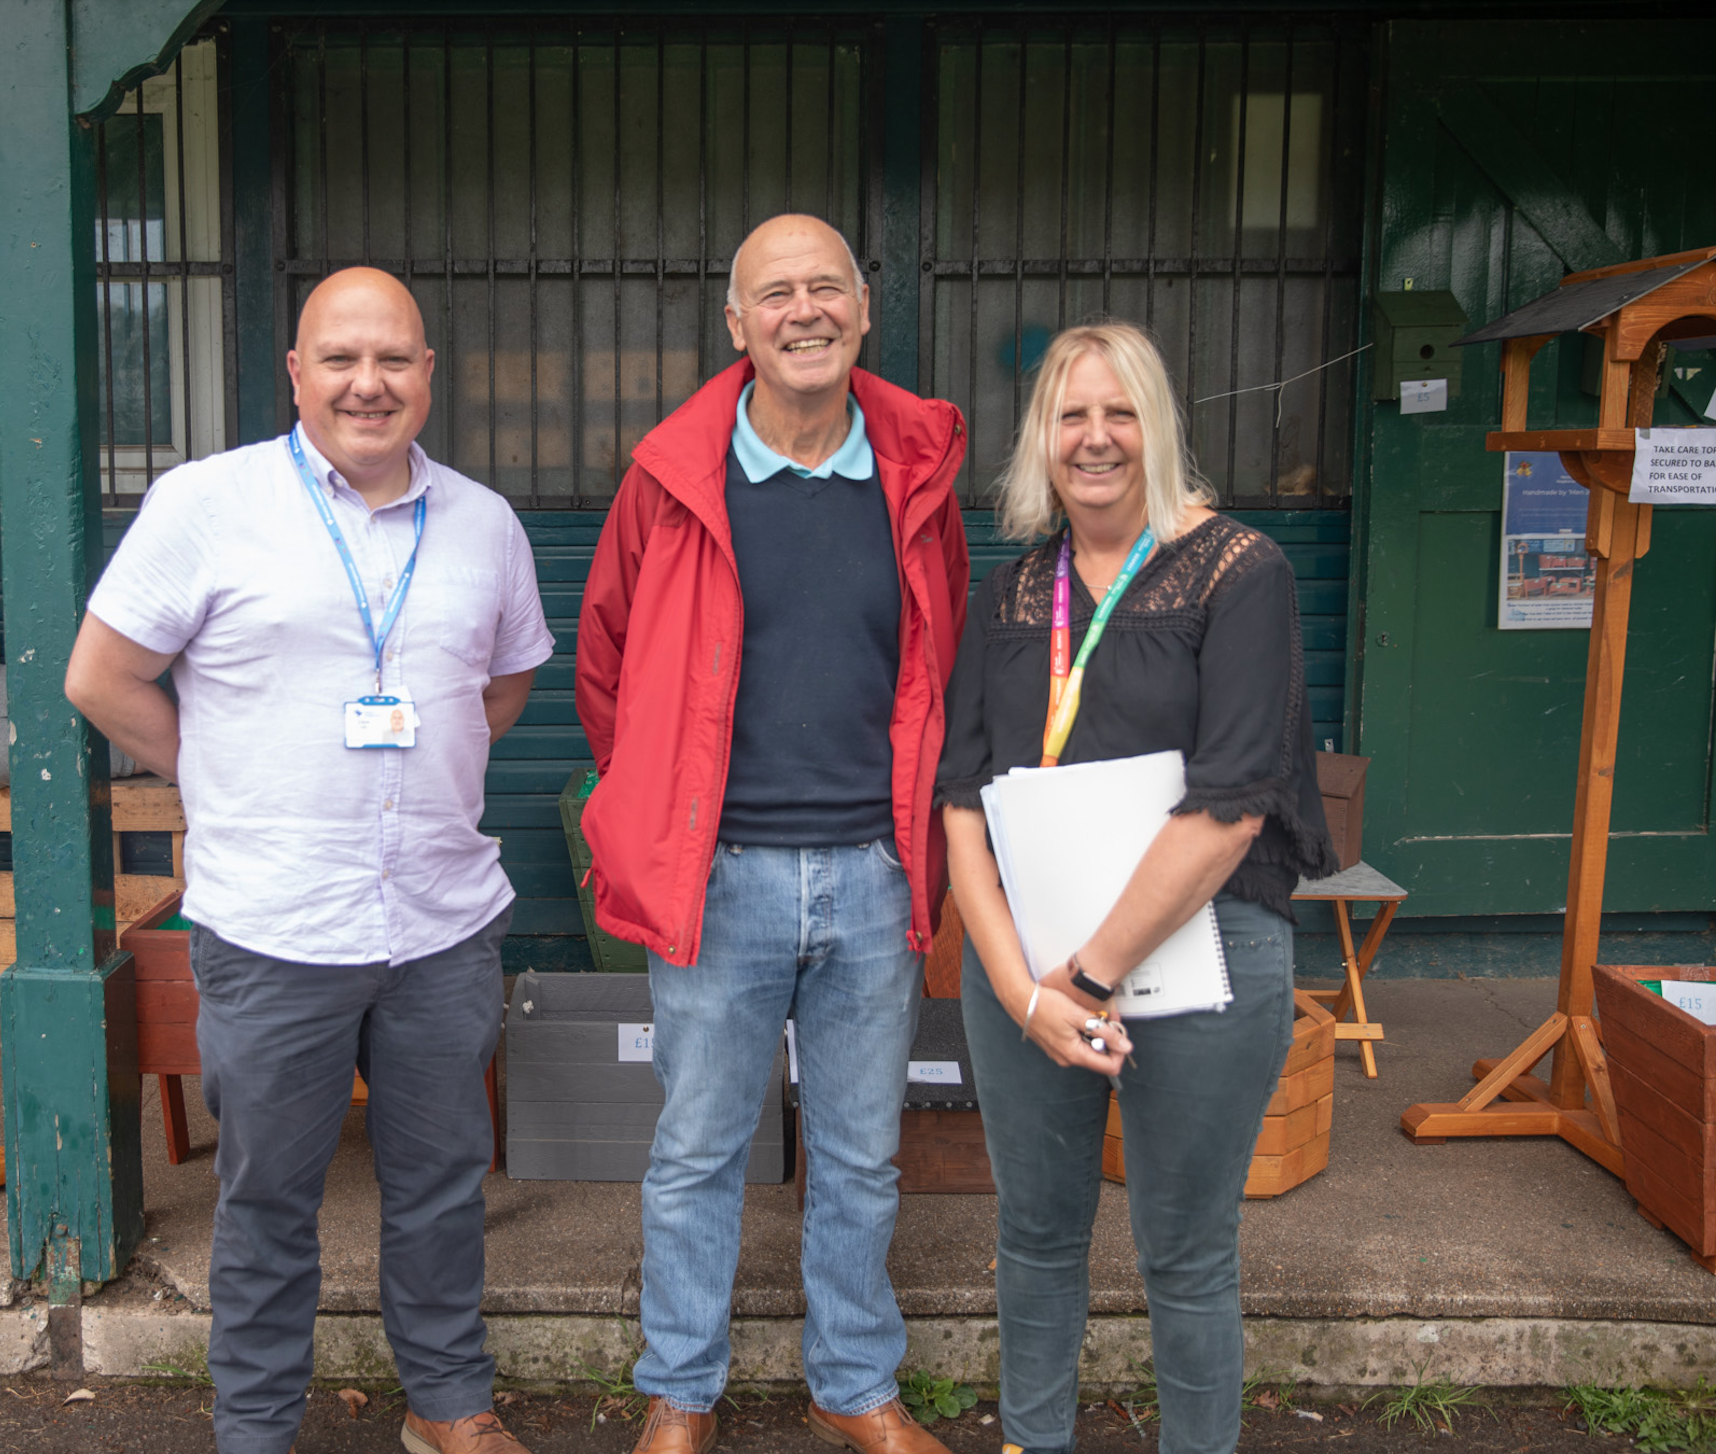 A photo of a member of the Men in Sheds group with Dave from Weston Hospicecare and Debbie from North Somerset council outside the Men in Sheds hut in Clarence Park.